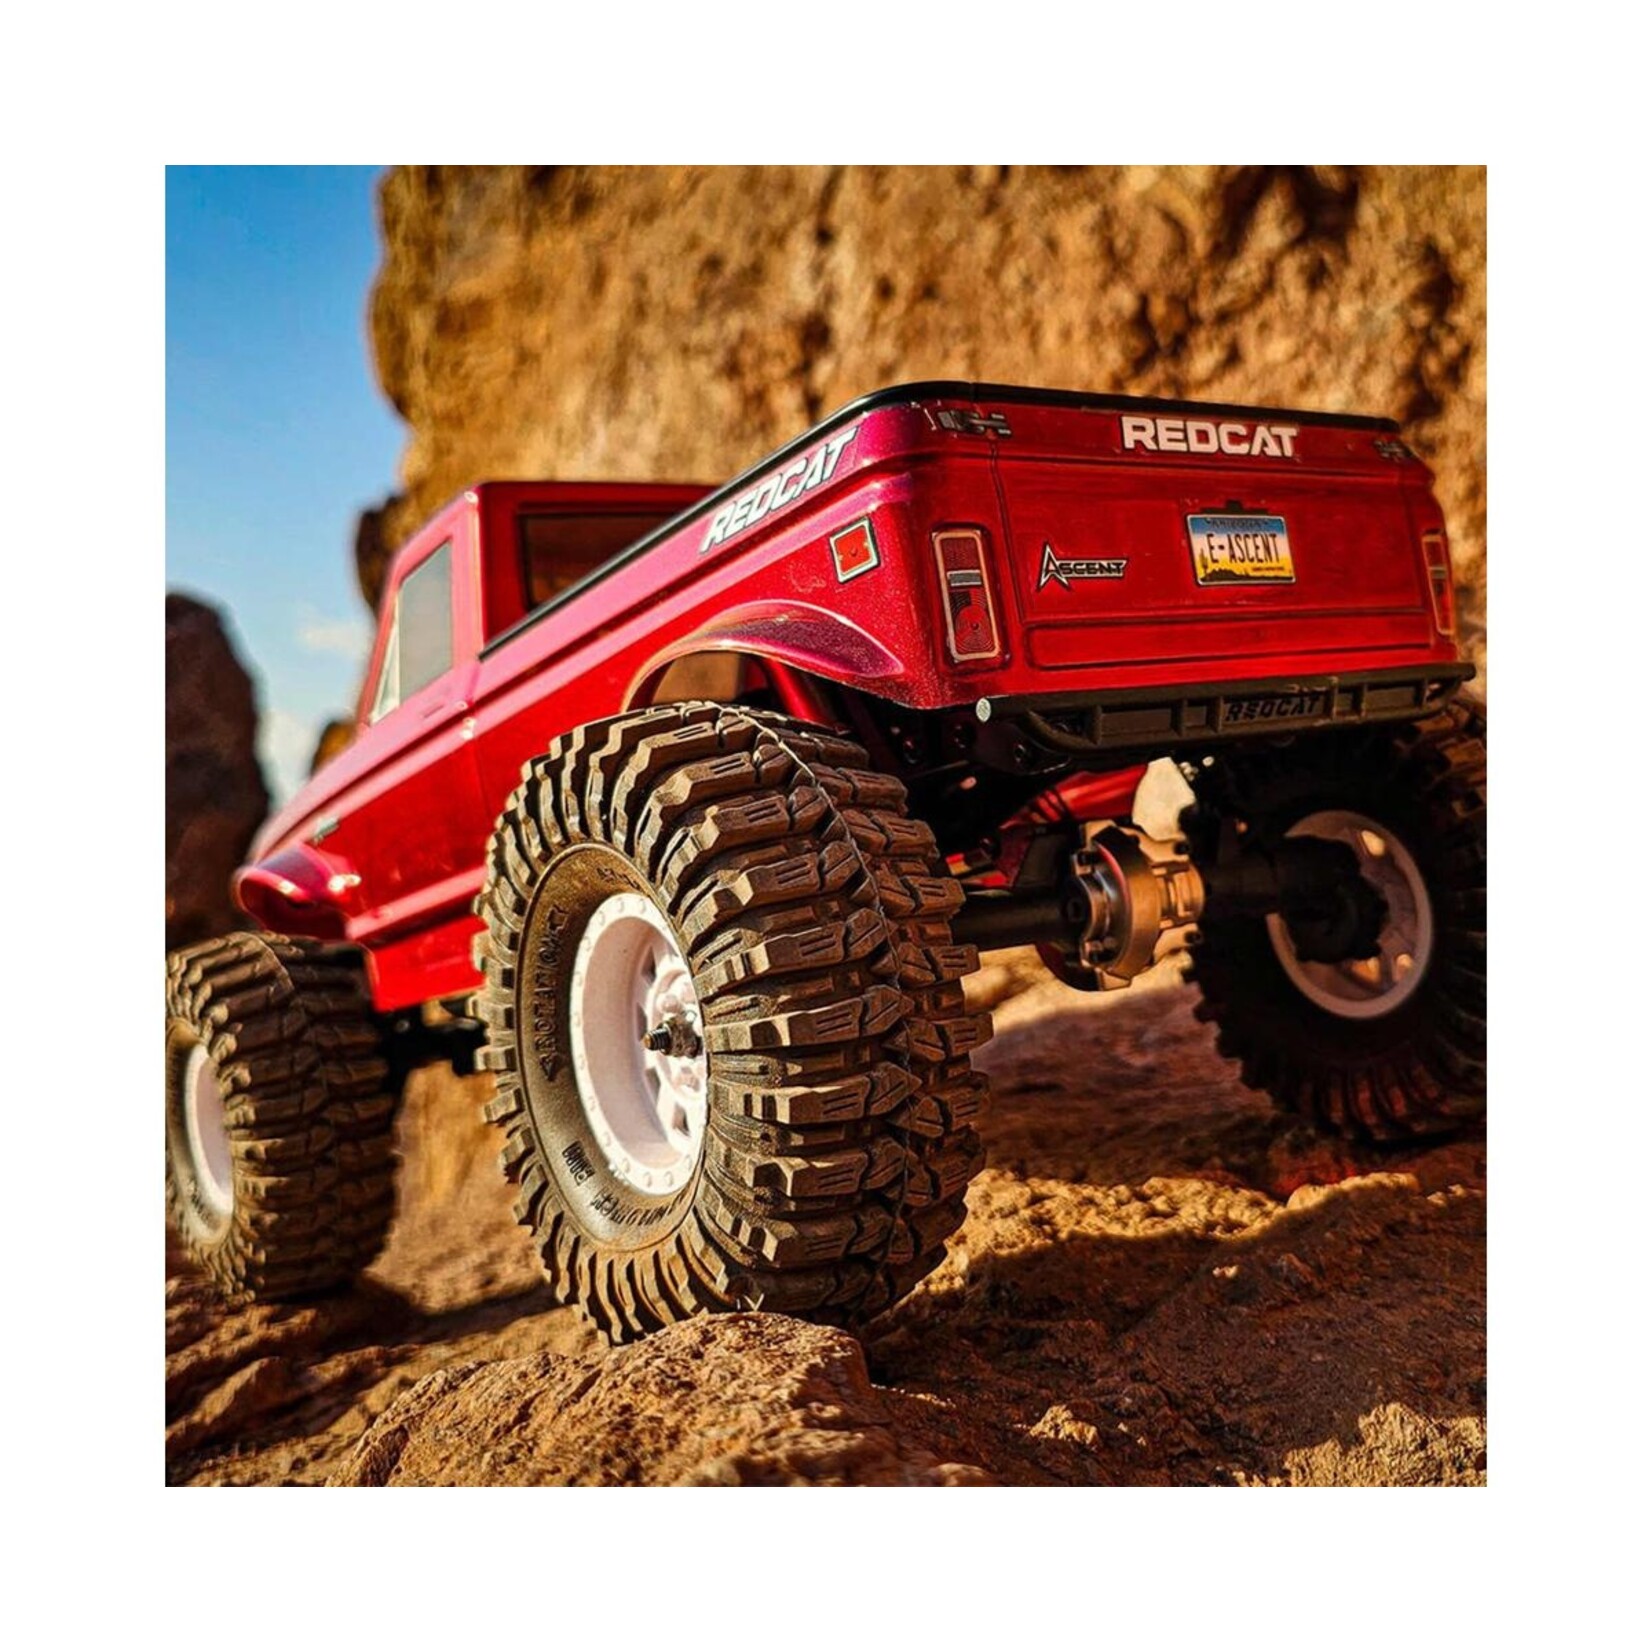 Redcat Racing Redcat Ascent LCG 1/10 4X4 RTR Rock Crawler (Red) w/2.4GHz Radio #RER22767